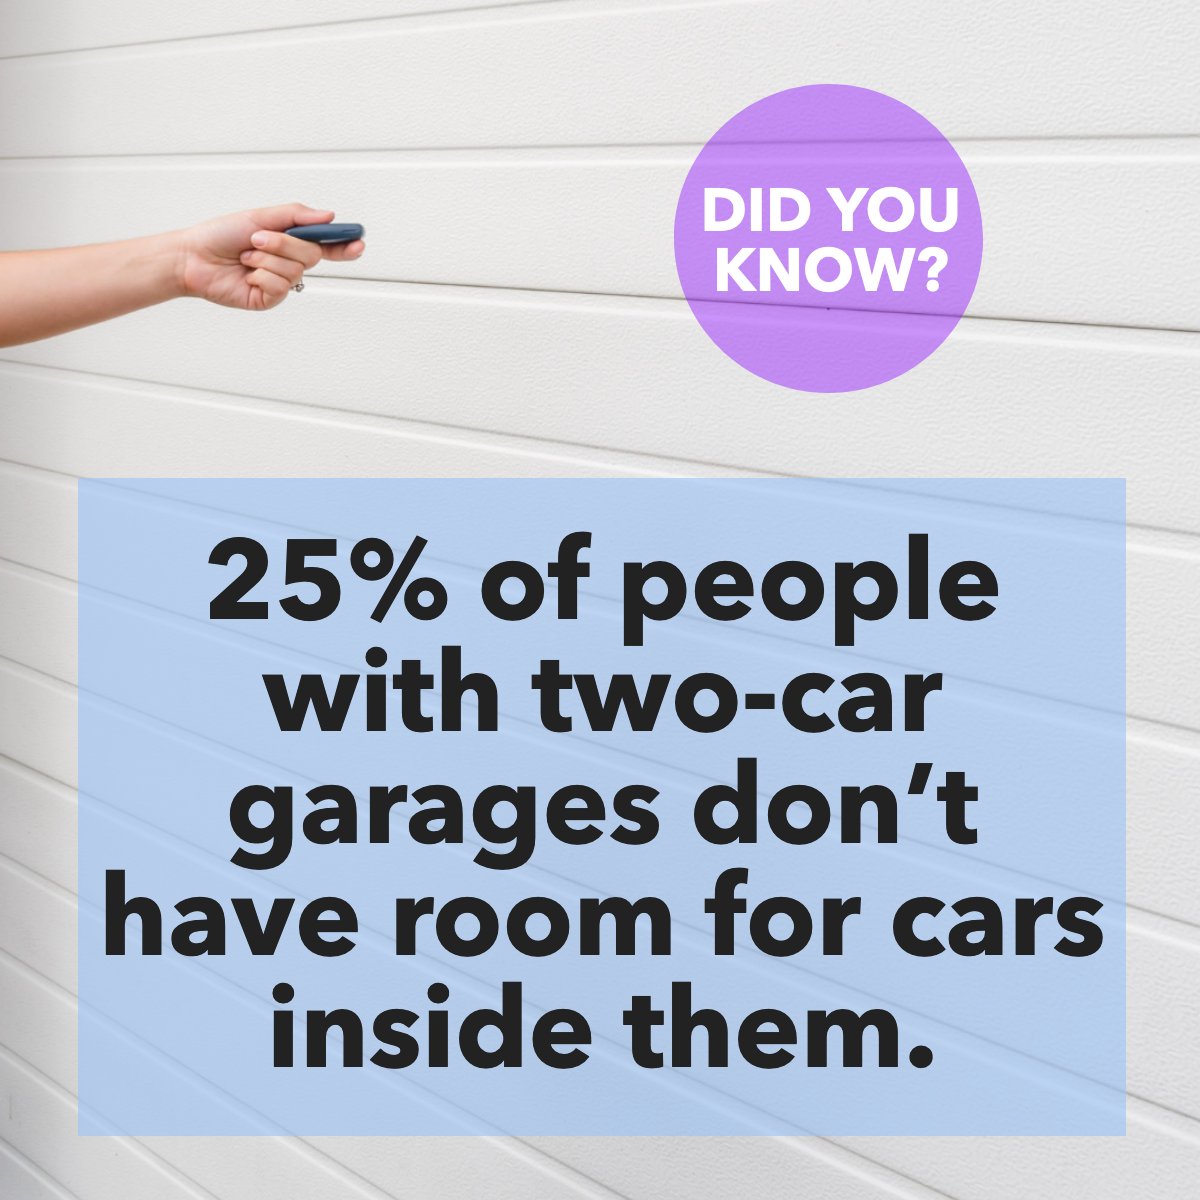 How much do you really know about garages and how they’re actually used by homeowners? 🤔 Let us know below! #realestatefacts #didyouknow #realestate101 #garage #homeowners #RacingRealEstateAgent #BarrettRealEstate #StoneTreeRealEstateTeam #maricopaazrealestate